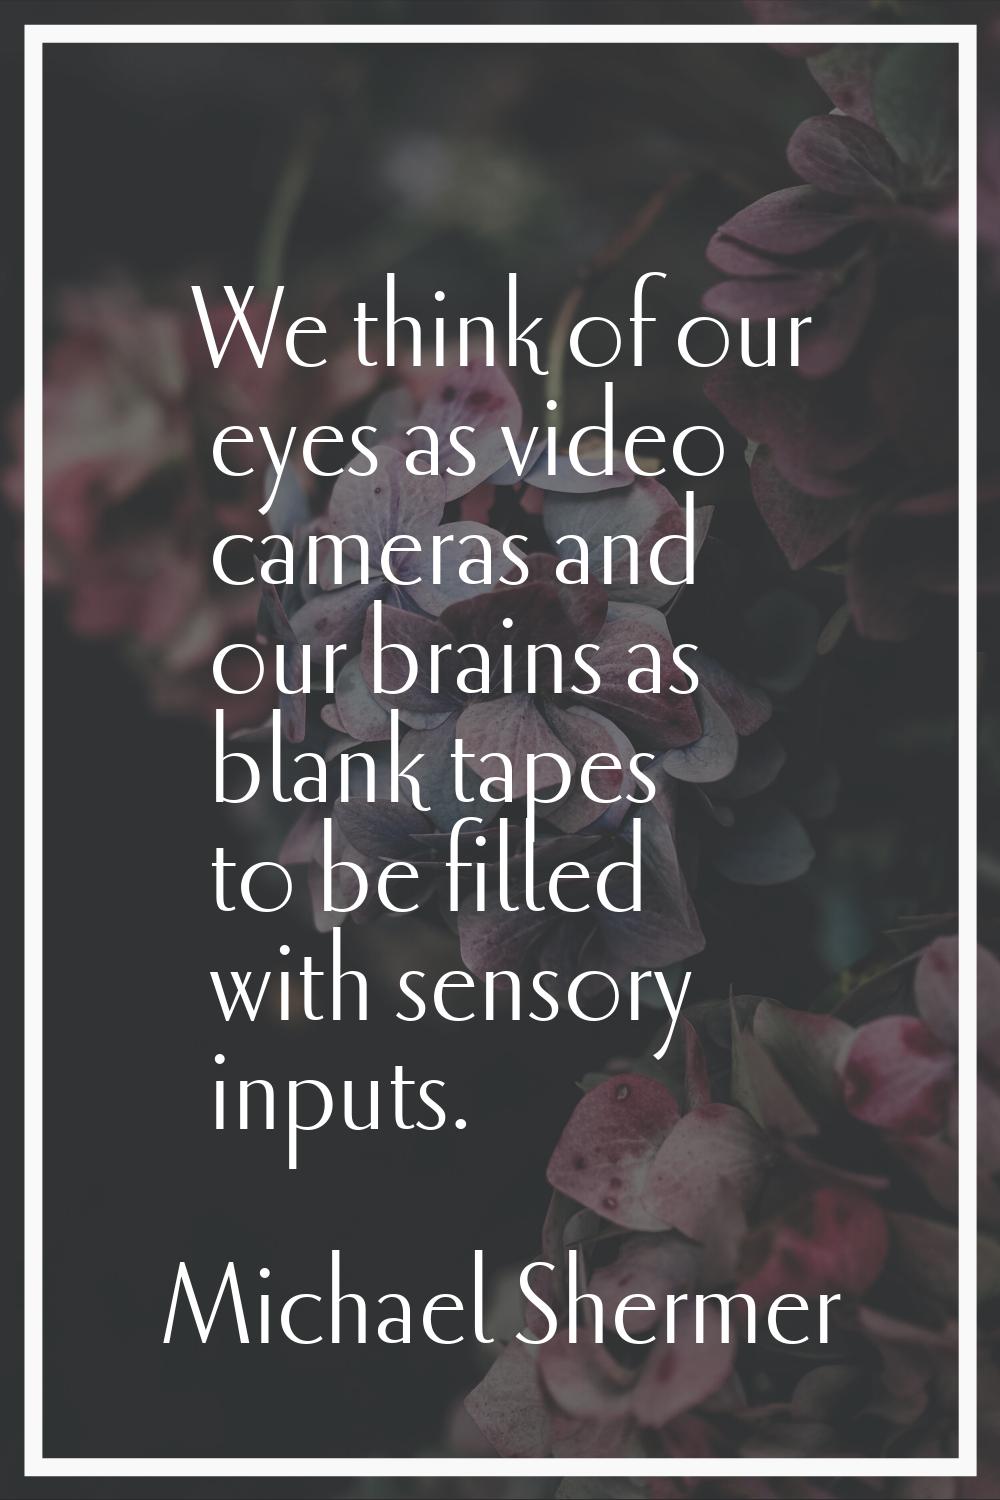 We think of our eyes as video cameras and our brains as blank tapes to be filled with sensory input